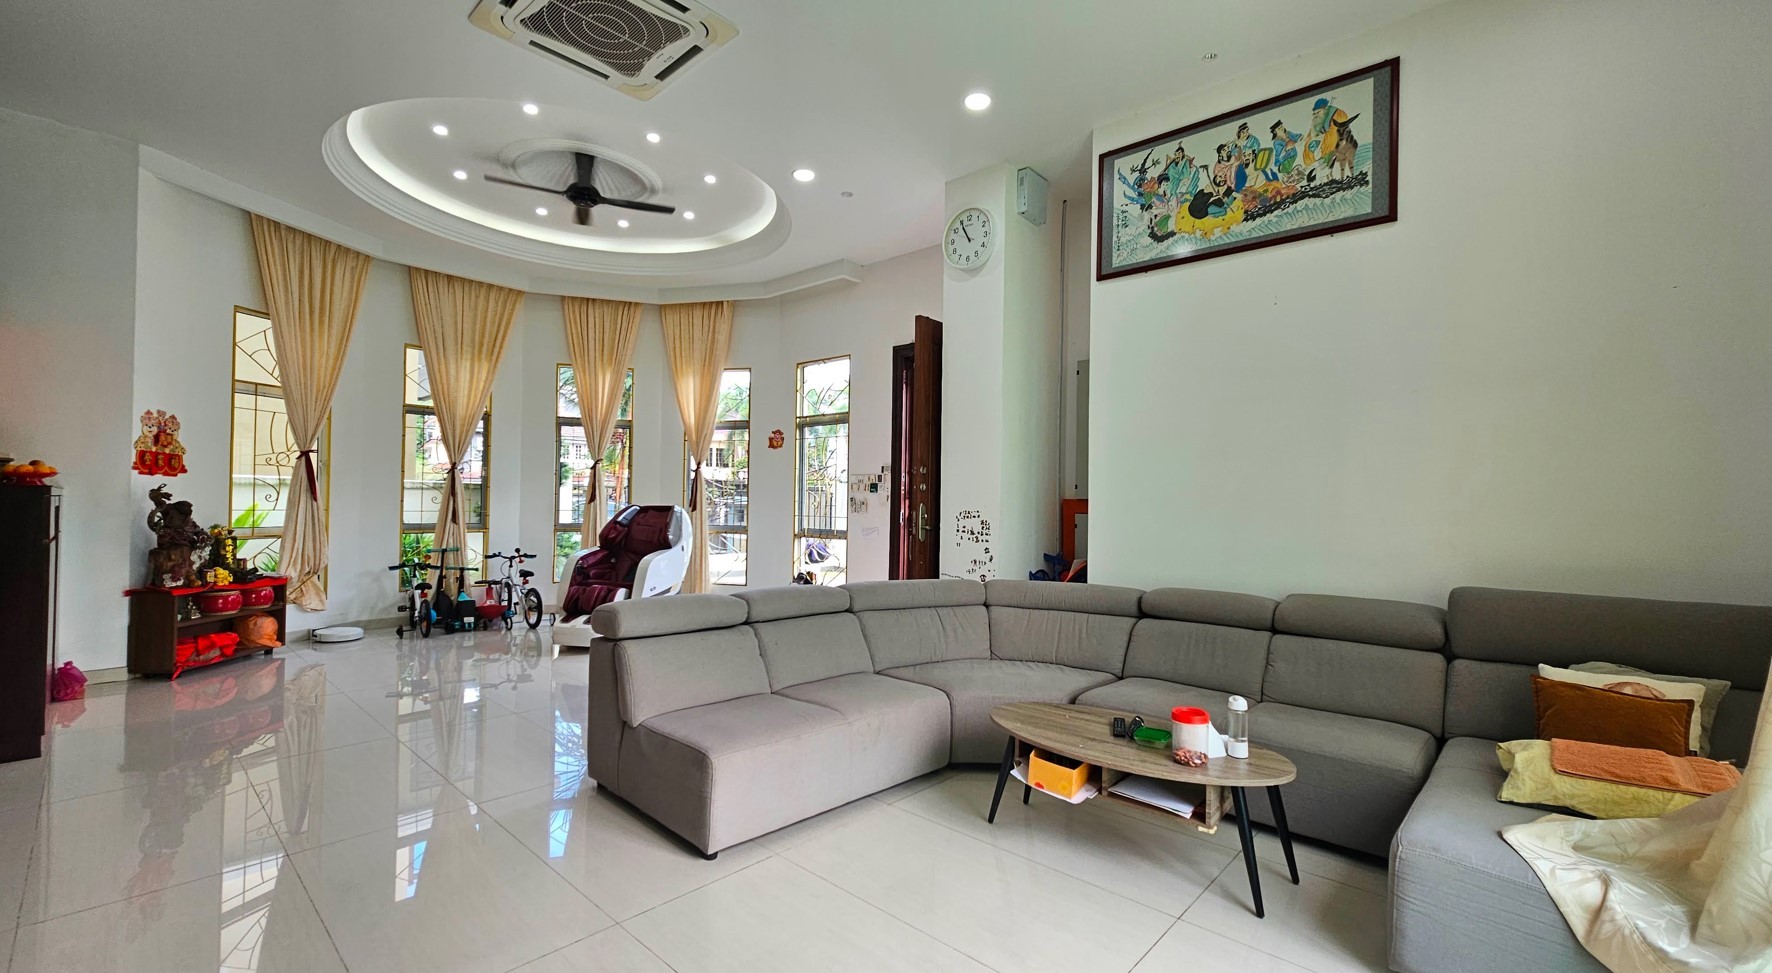 Extensive Renovations Spacious and Well-Appointed 3.5 Storey Bungalow in Taman Templer Saujana